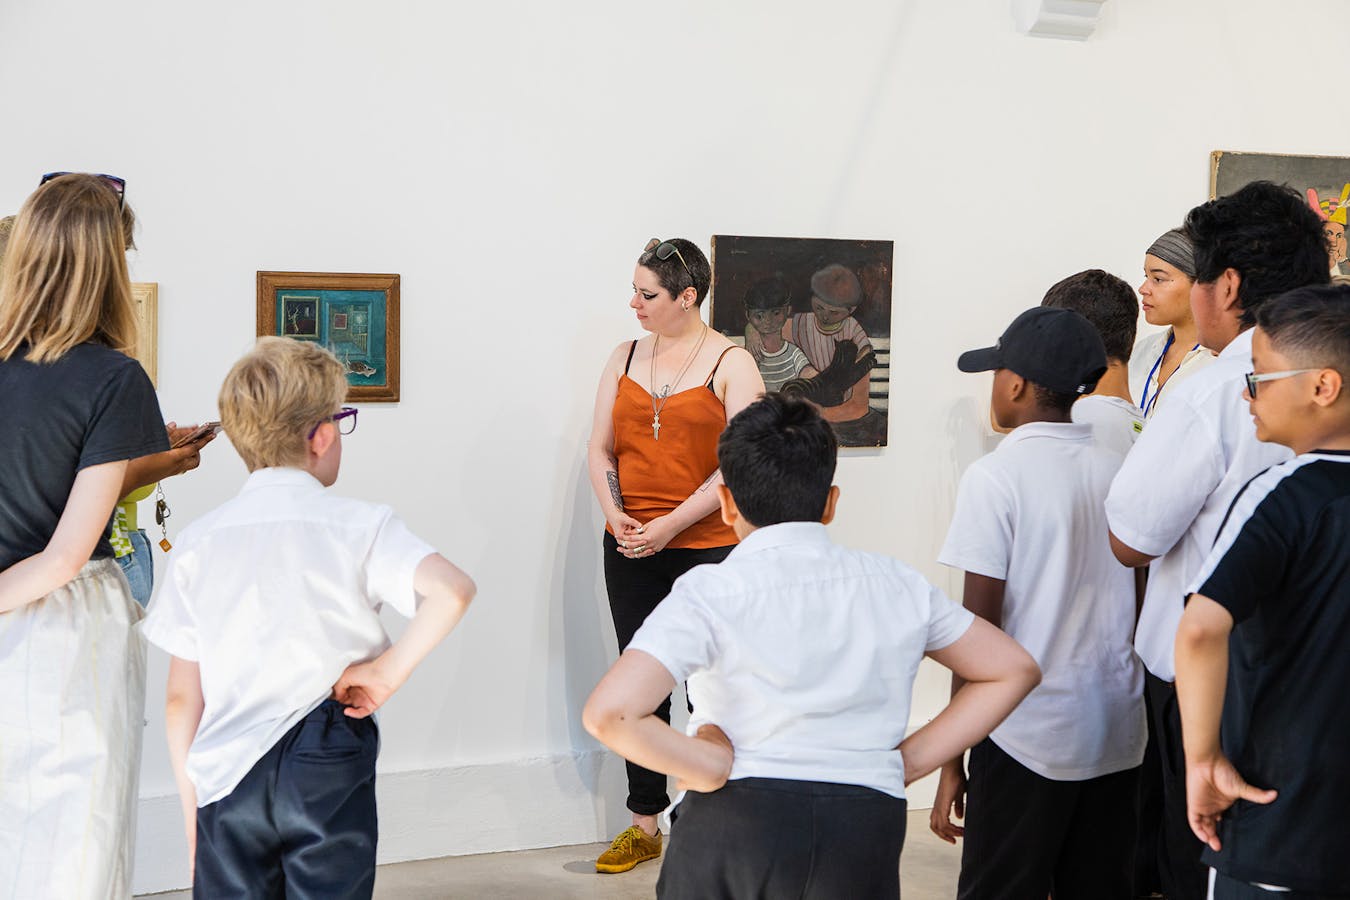 a group of school children gather round a painting in a gallery, as part of a guided tour